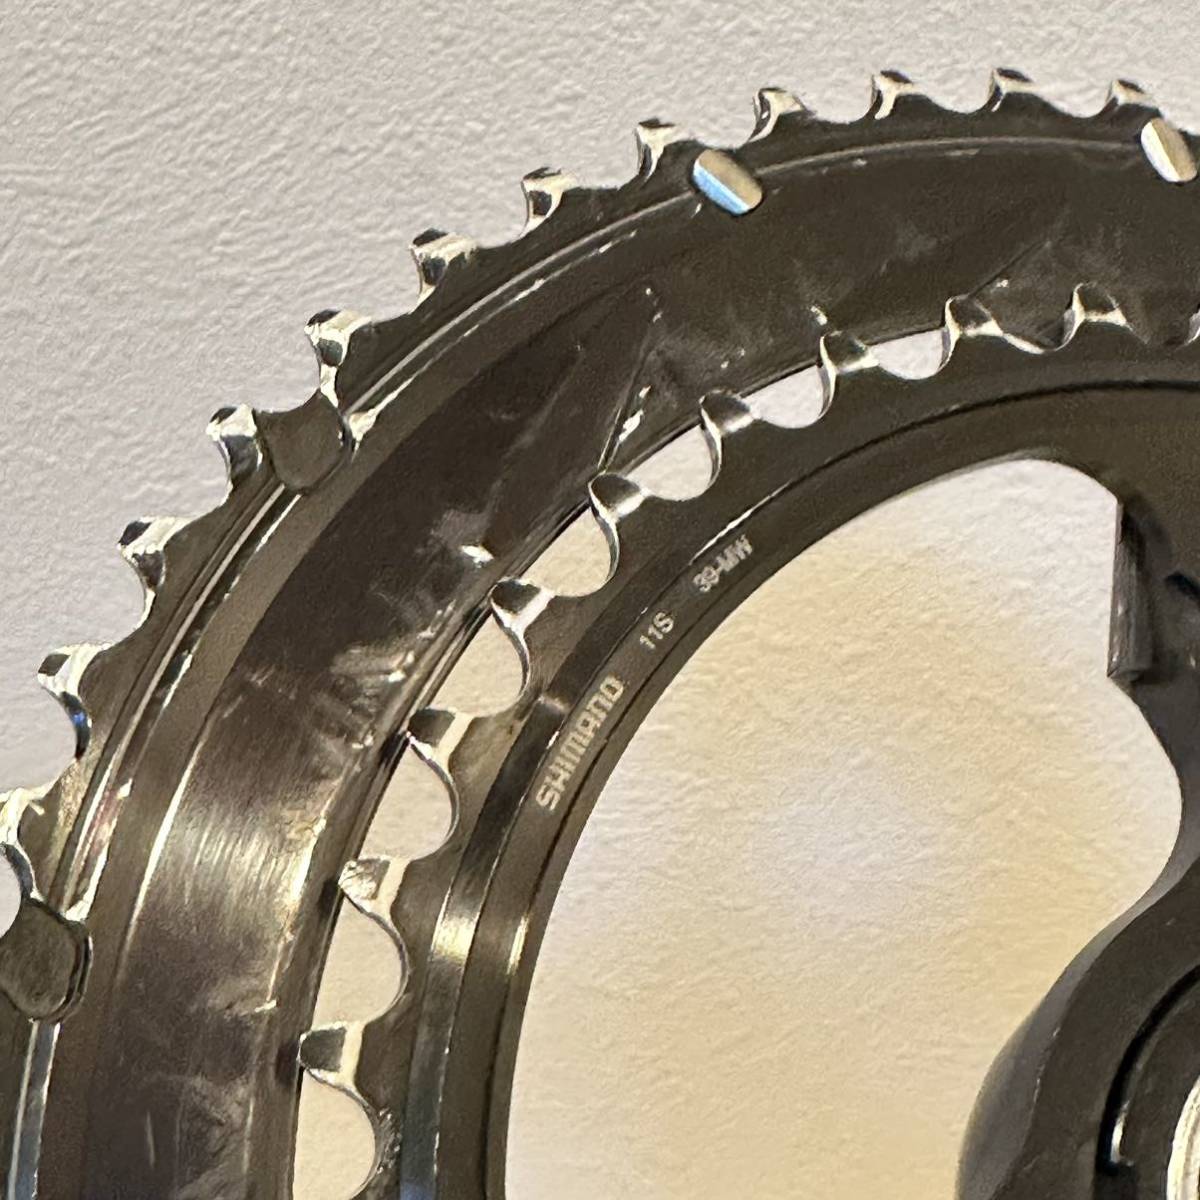 S-Works Power Meter Crank エスワークス パワーメーター クランク 172.5mm 53-39T 4アーム化 シマノ SHIMANO specialized_画像3